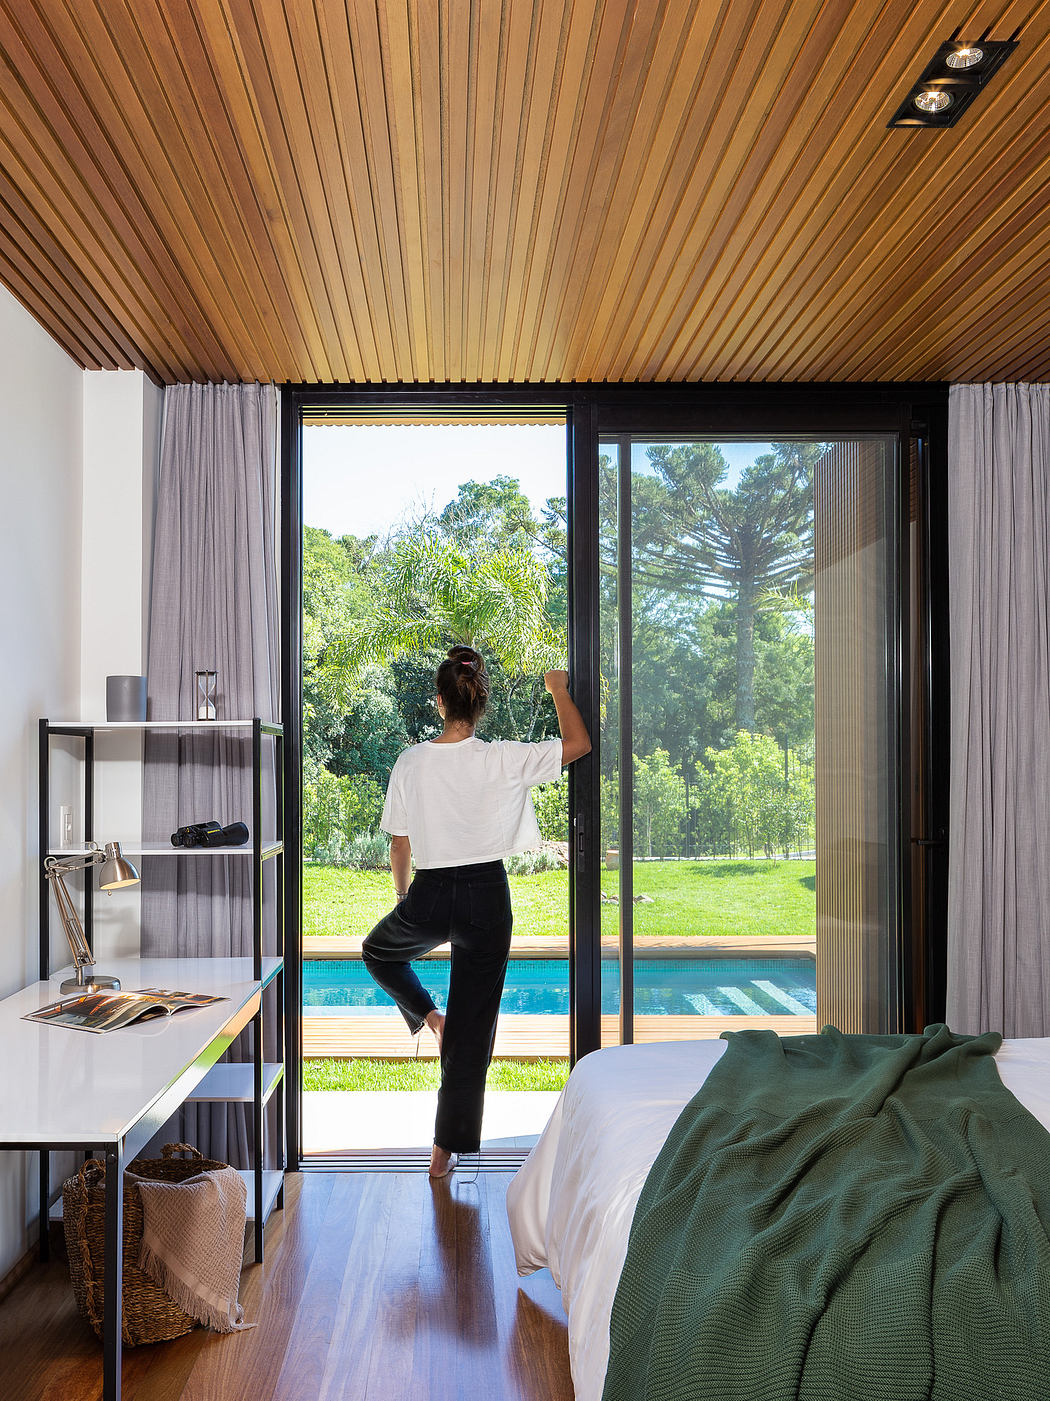 Modern bedroom with wood ceiling, large window, and person looking outside.